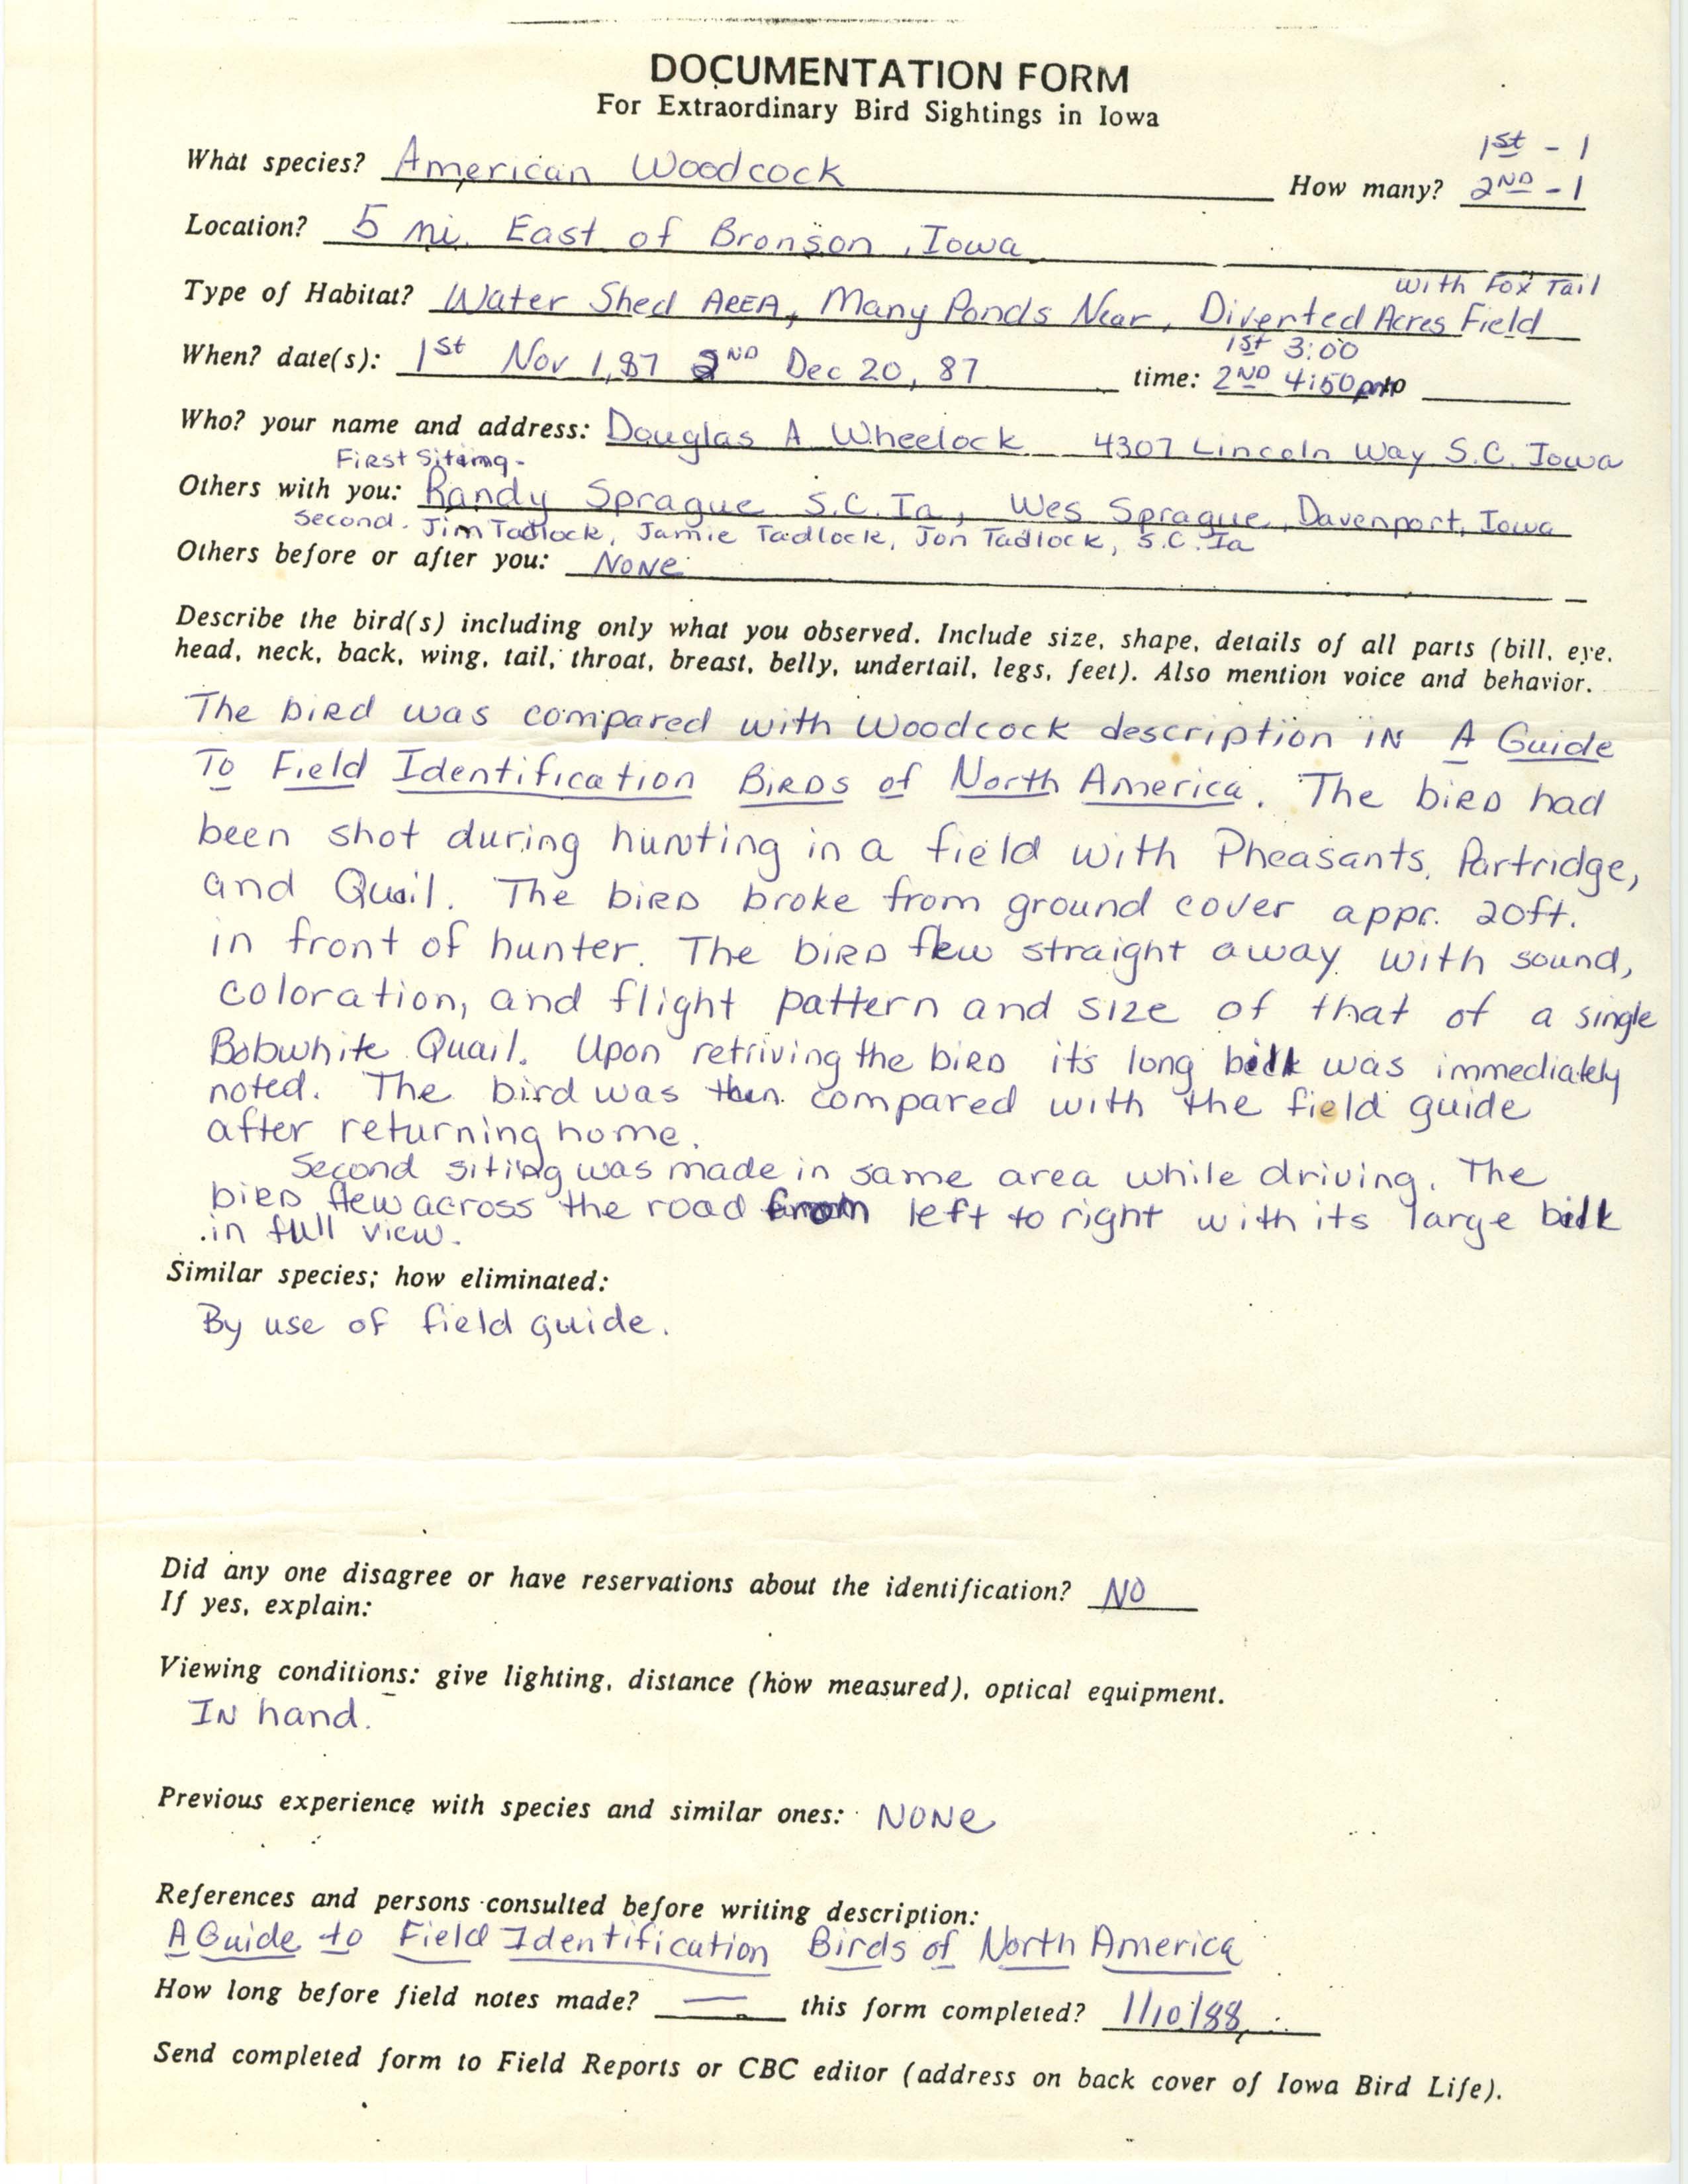 Rare bird documentation form for American Woodcock at Bronson in 1987